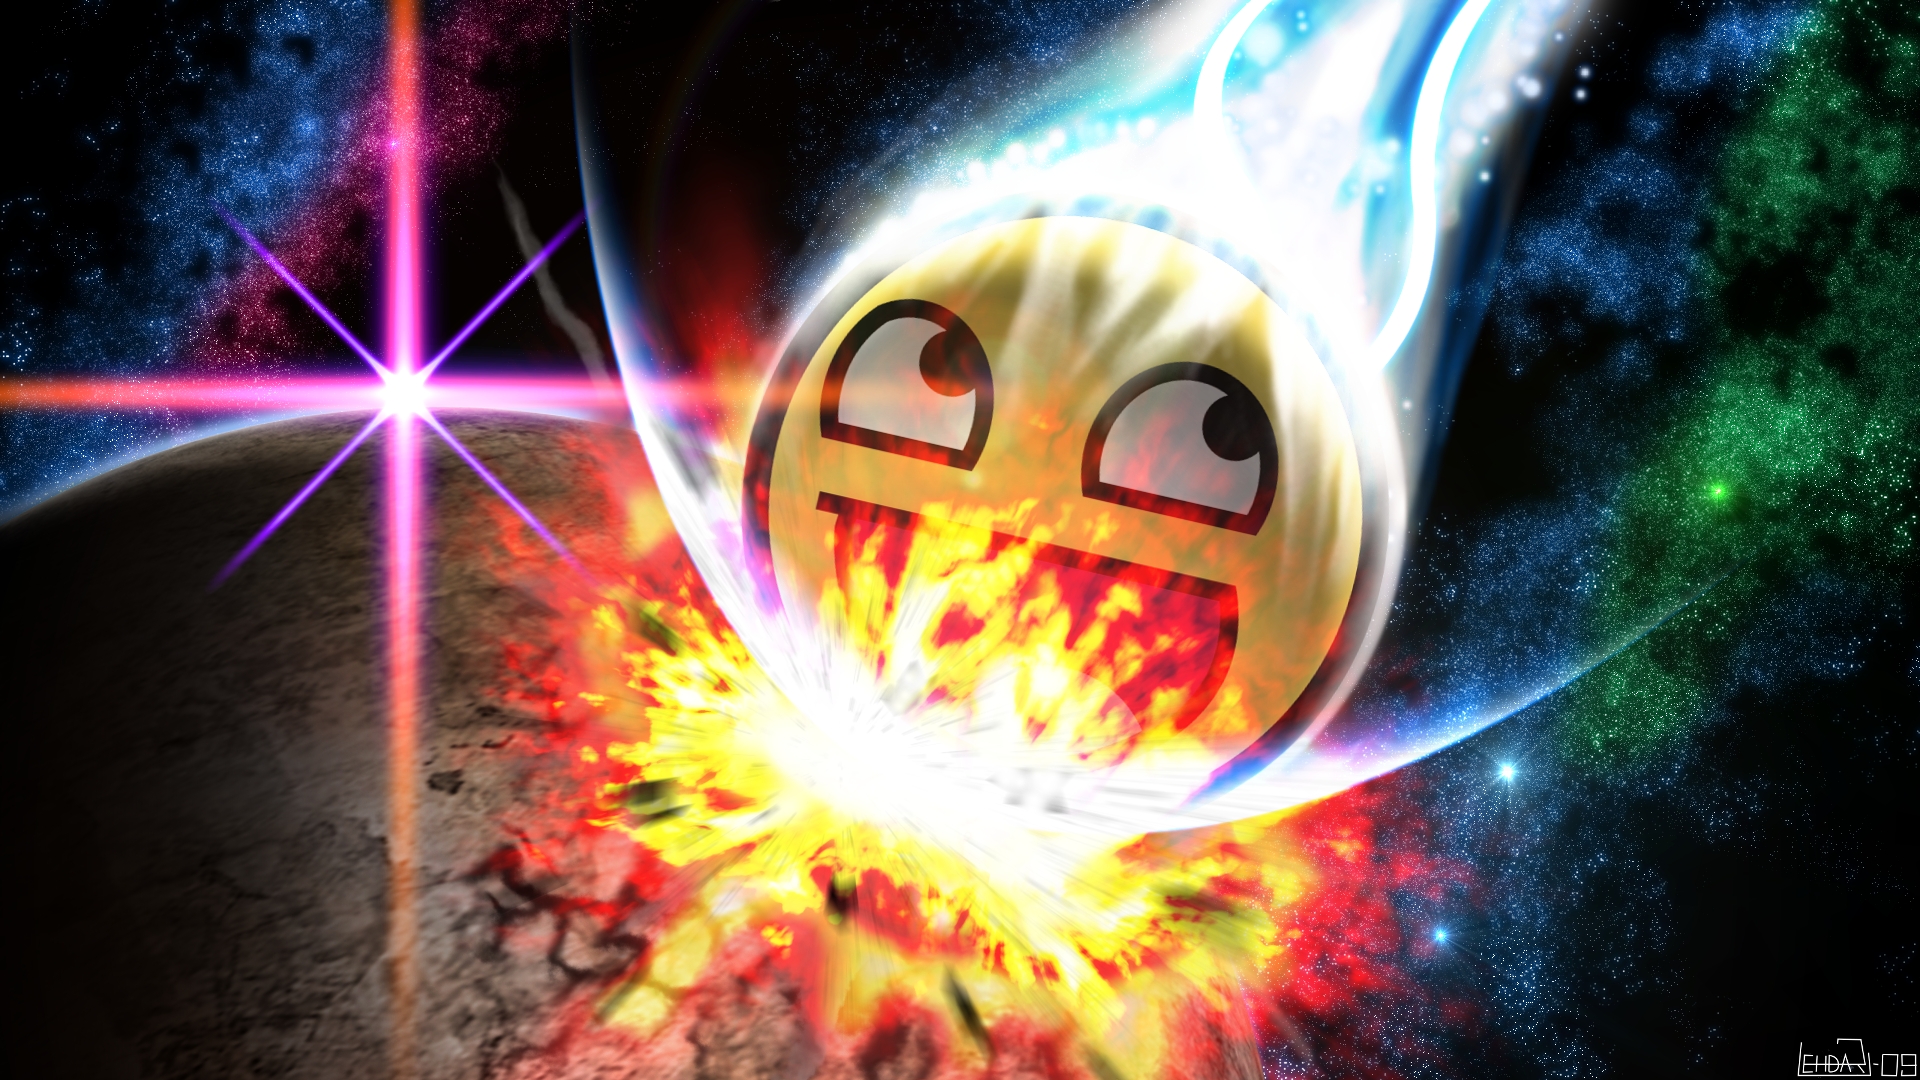 epic face explosion